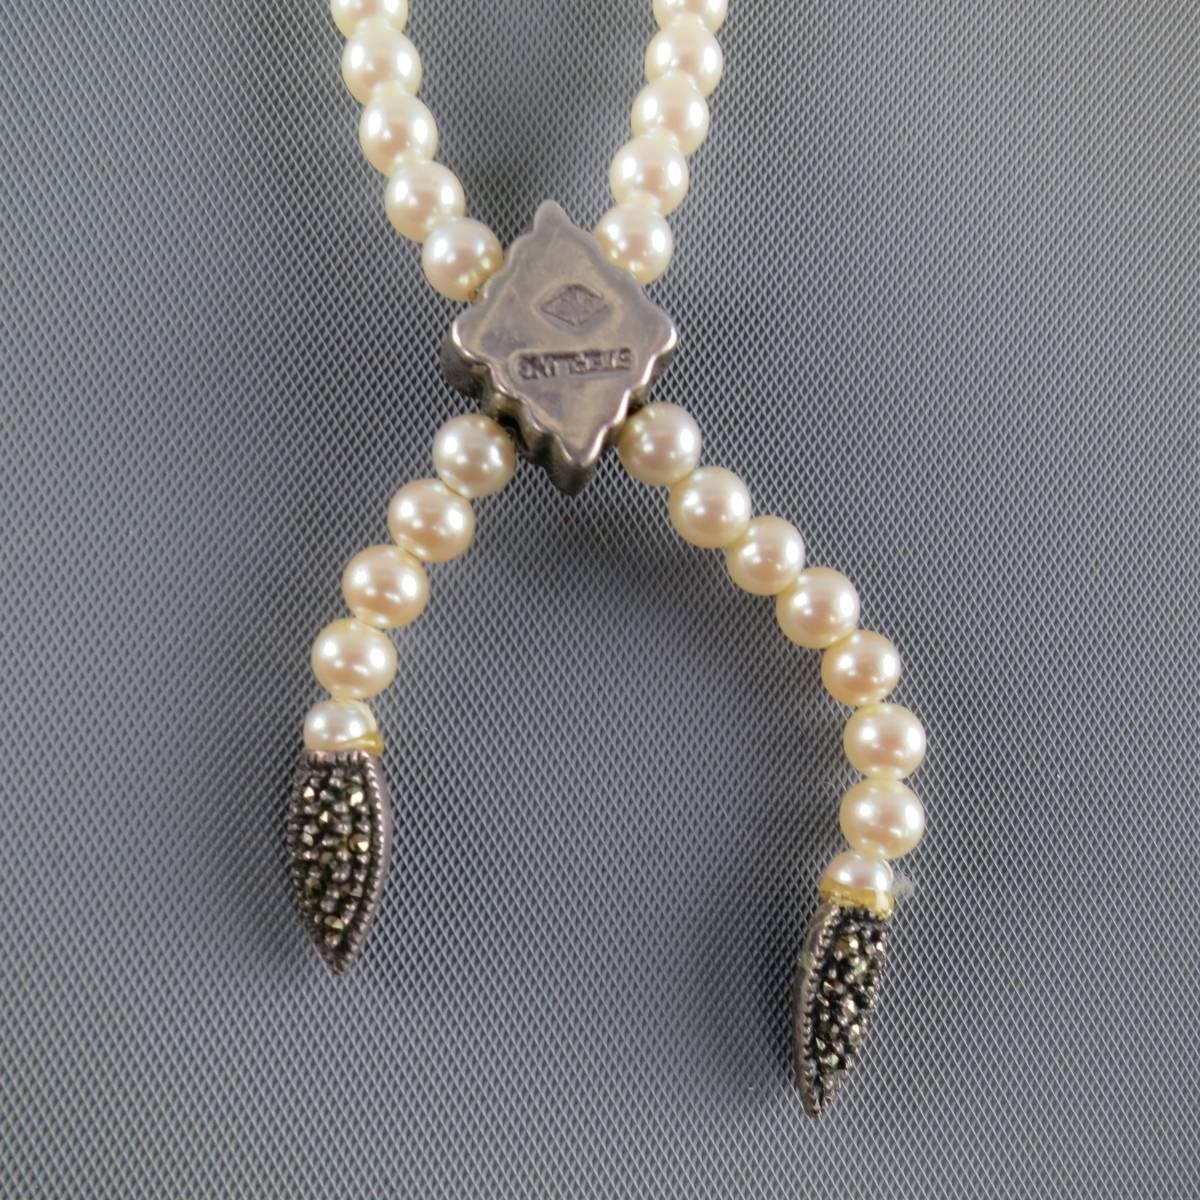 Women's Vintage 1940's Crystal Sterling Silver Center Pearl Necklace